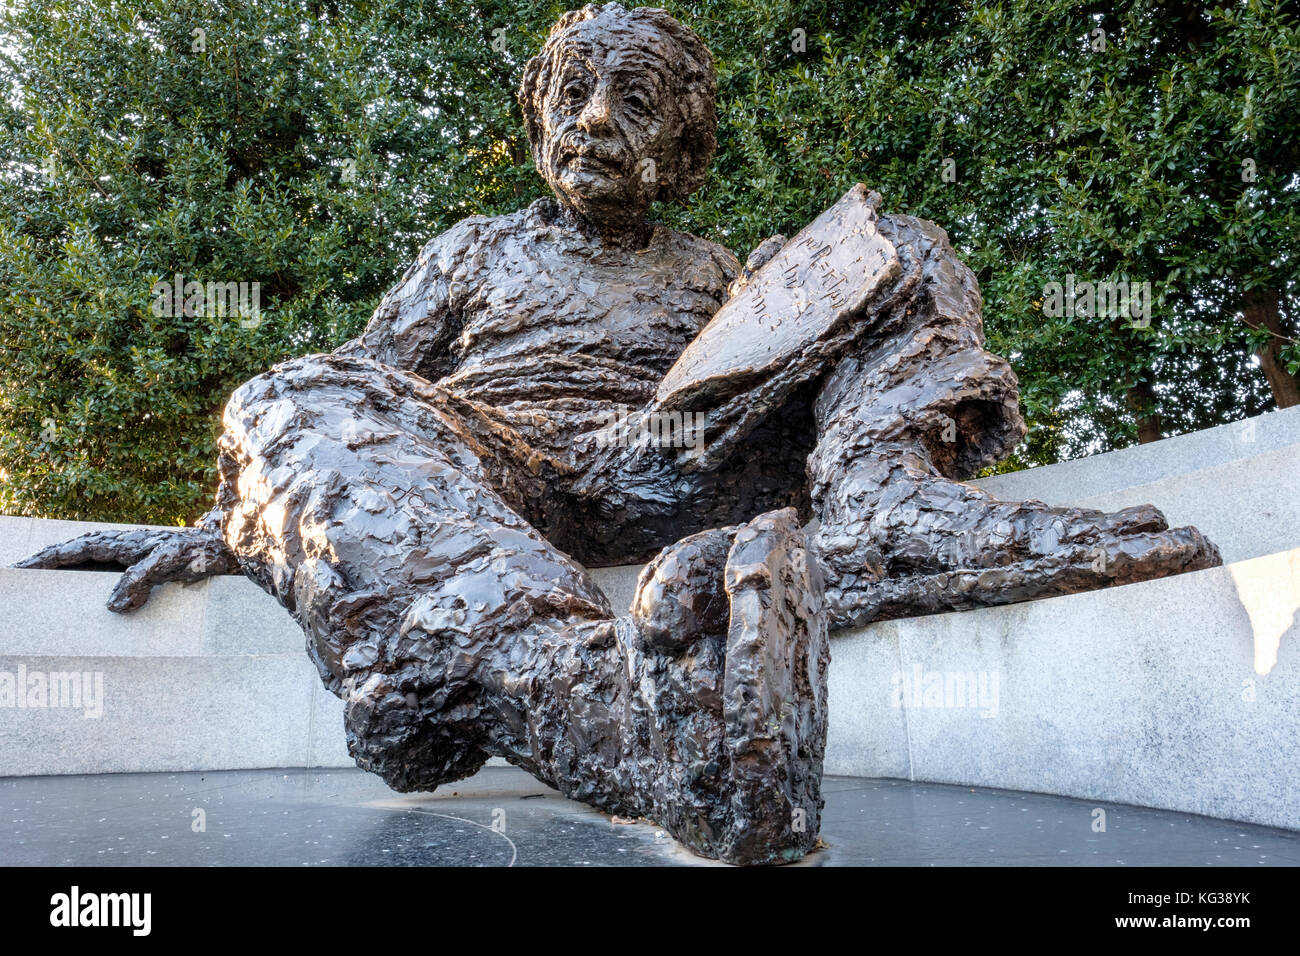 Albert Einstein Memorial at the National Academy of Sciences, Washington, DC, United States of America, USA. Stock Photo